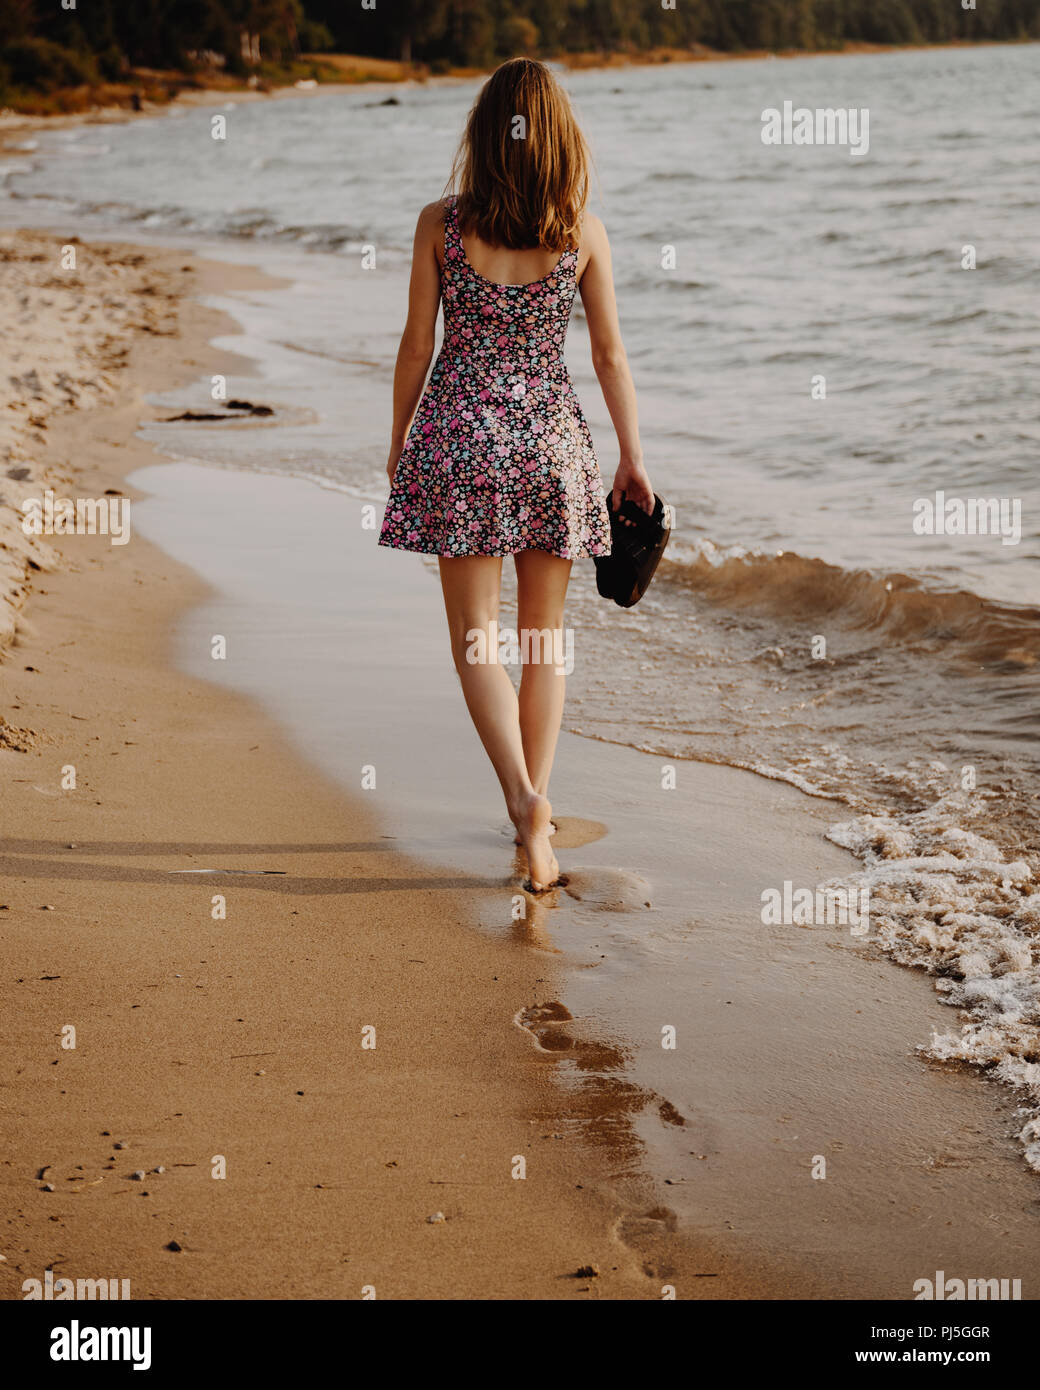 Teenage Girl Strolling Along The Beach at Sunset Holding Her Sandals Stock Photo